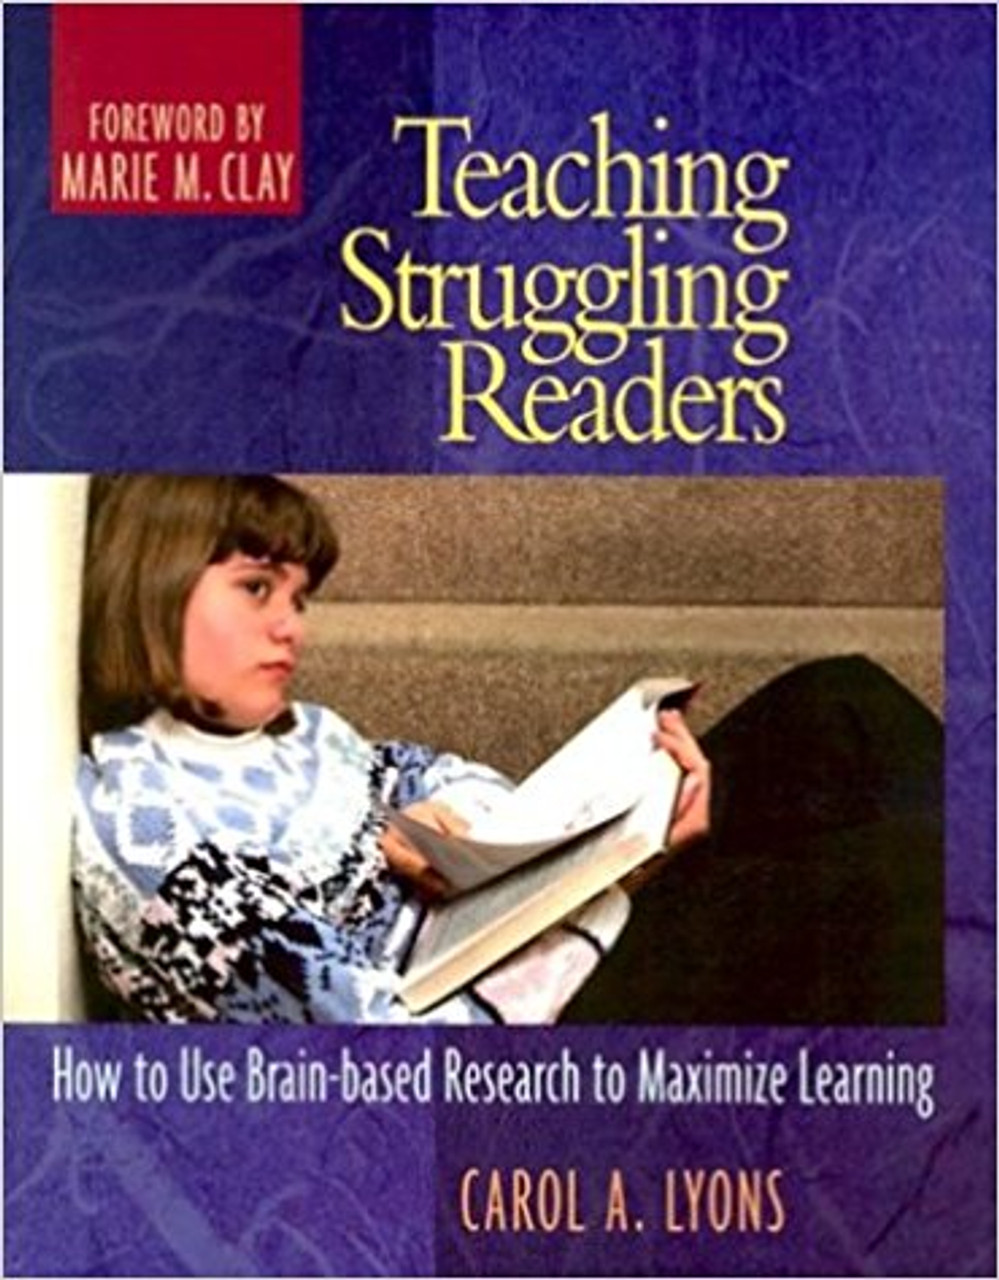 Teaching Struggling Readers: How to Use Brain-Based Research to Maximize Learning by Carol Lyons